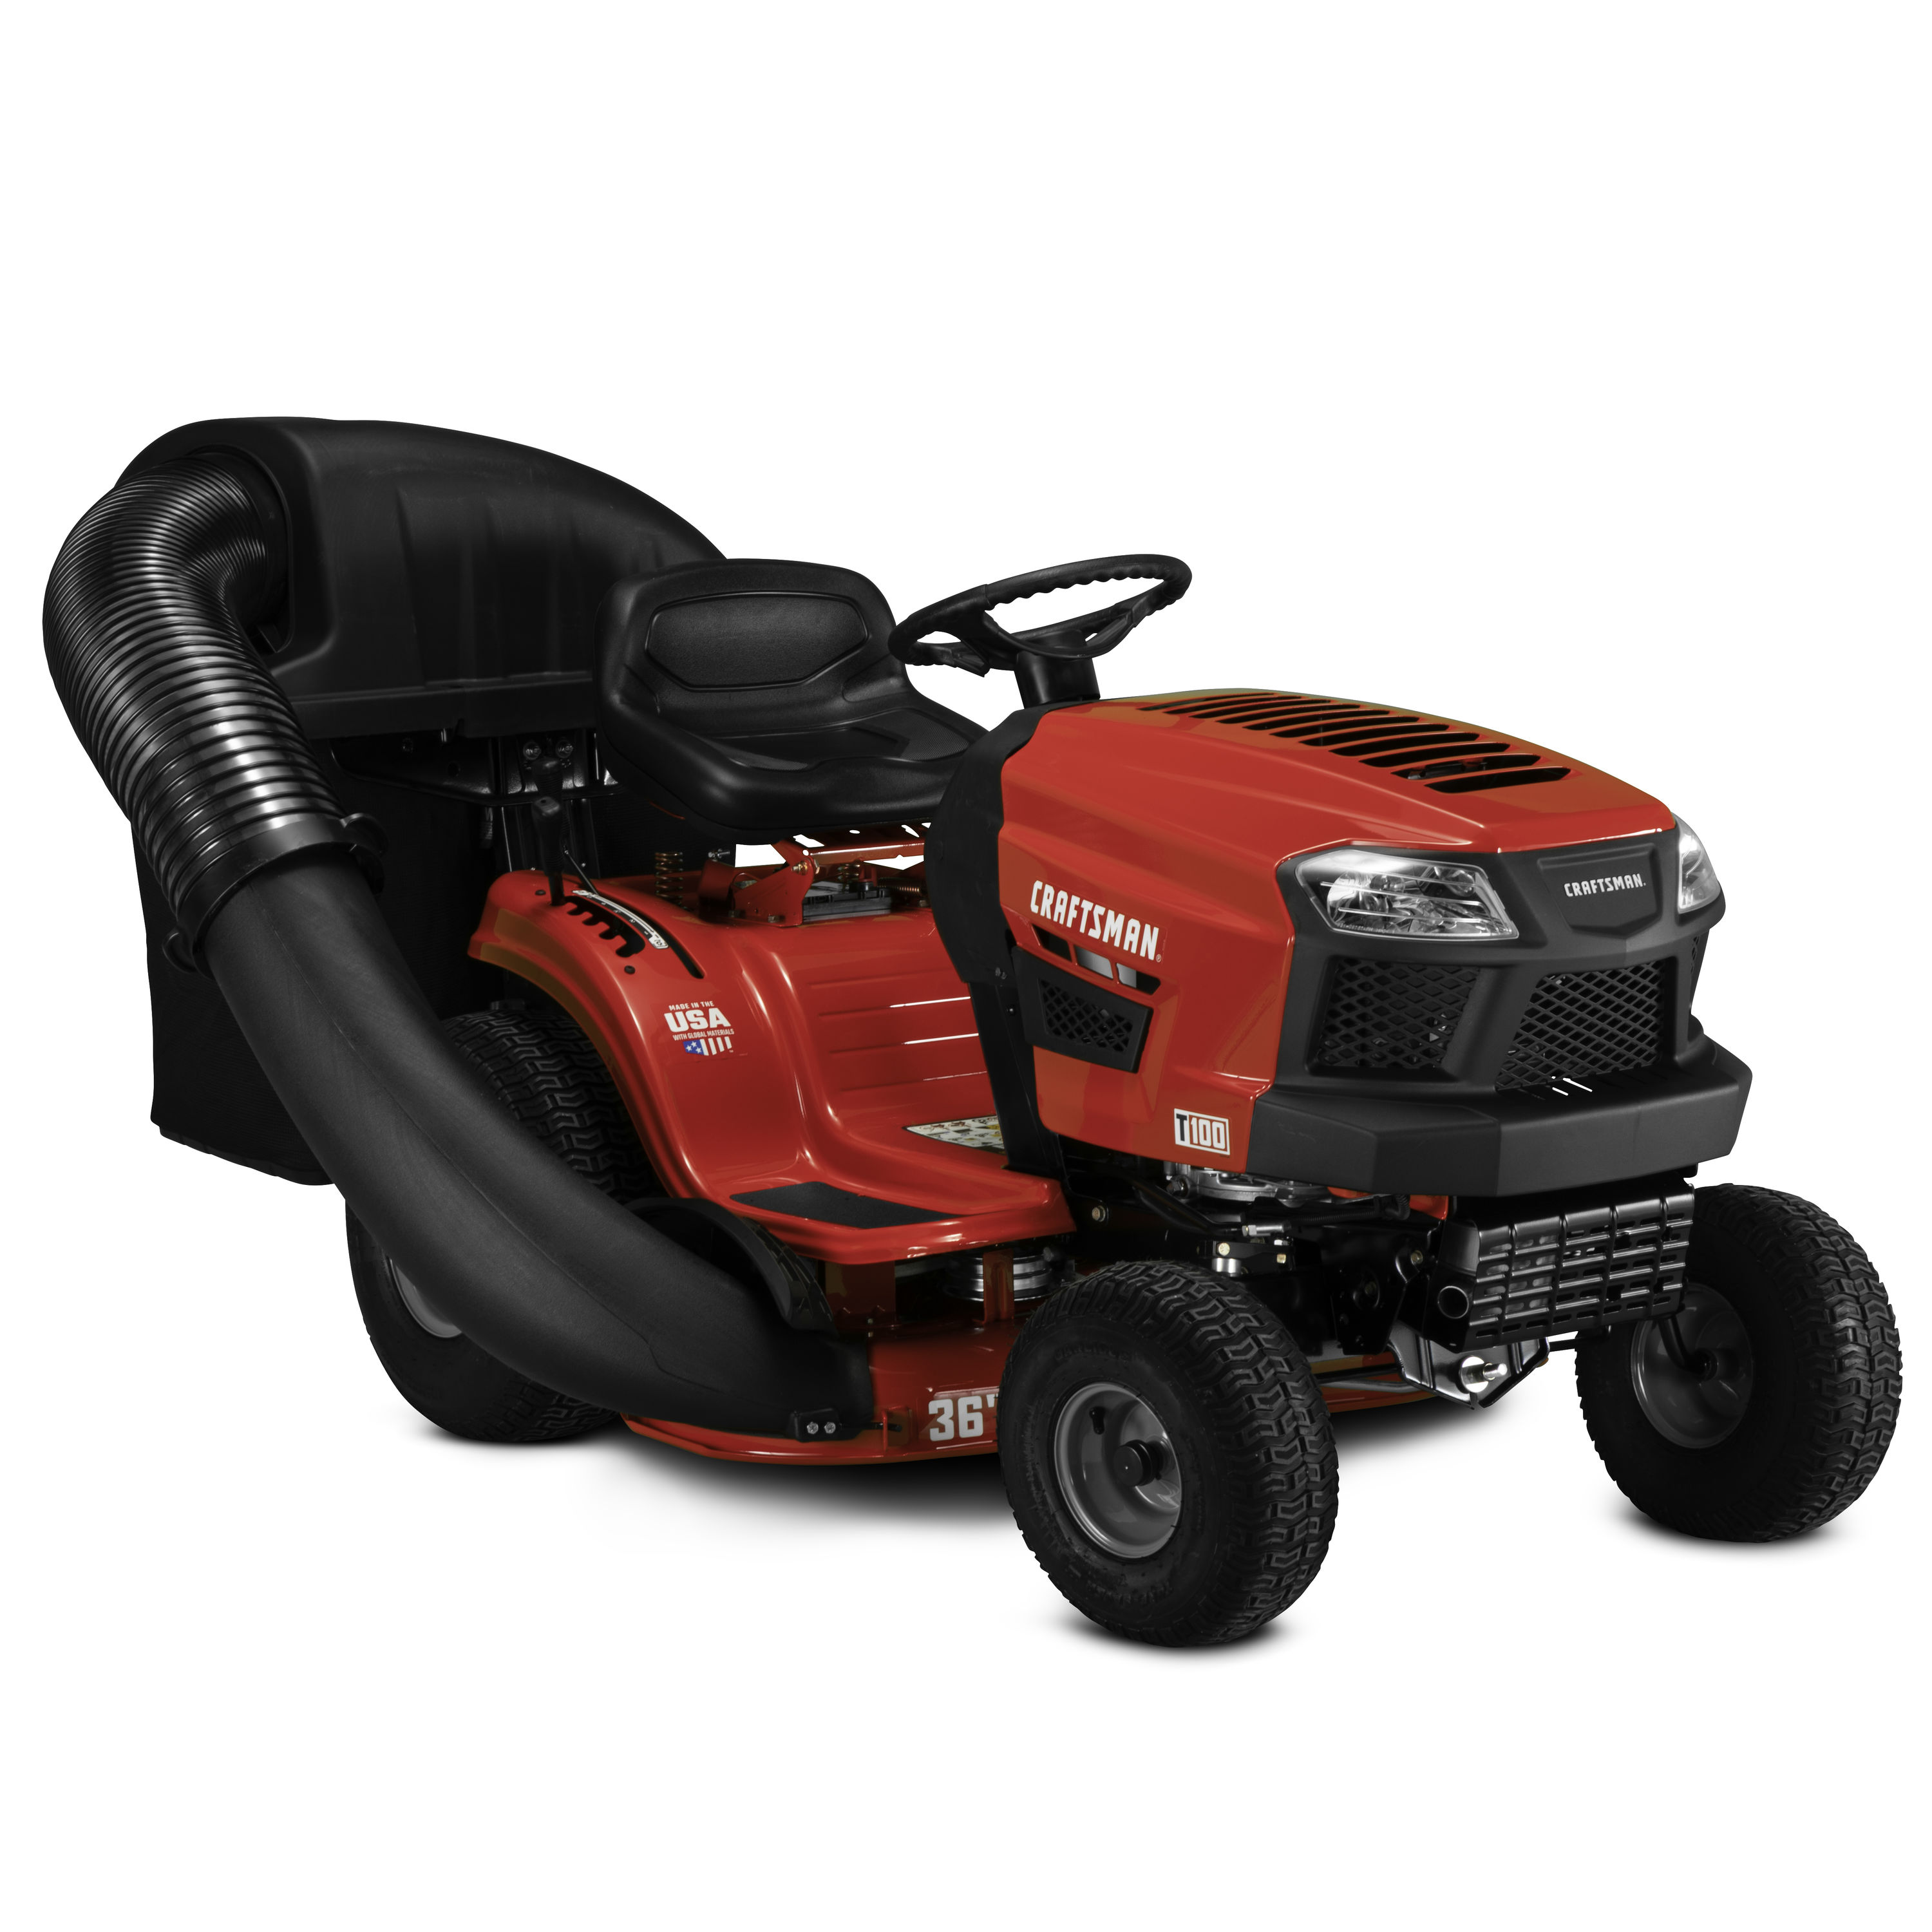 CRAFTSMAN T100 11.5-HP Manual/Gear 36-in Riding Lawn Mower with Mulching  Capability (Included) in the Gas Riding Lawn Mowers department at Lowes.com